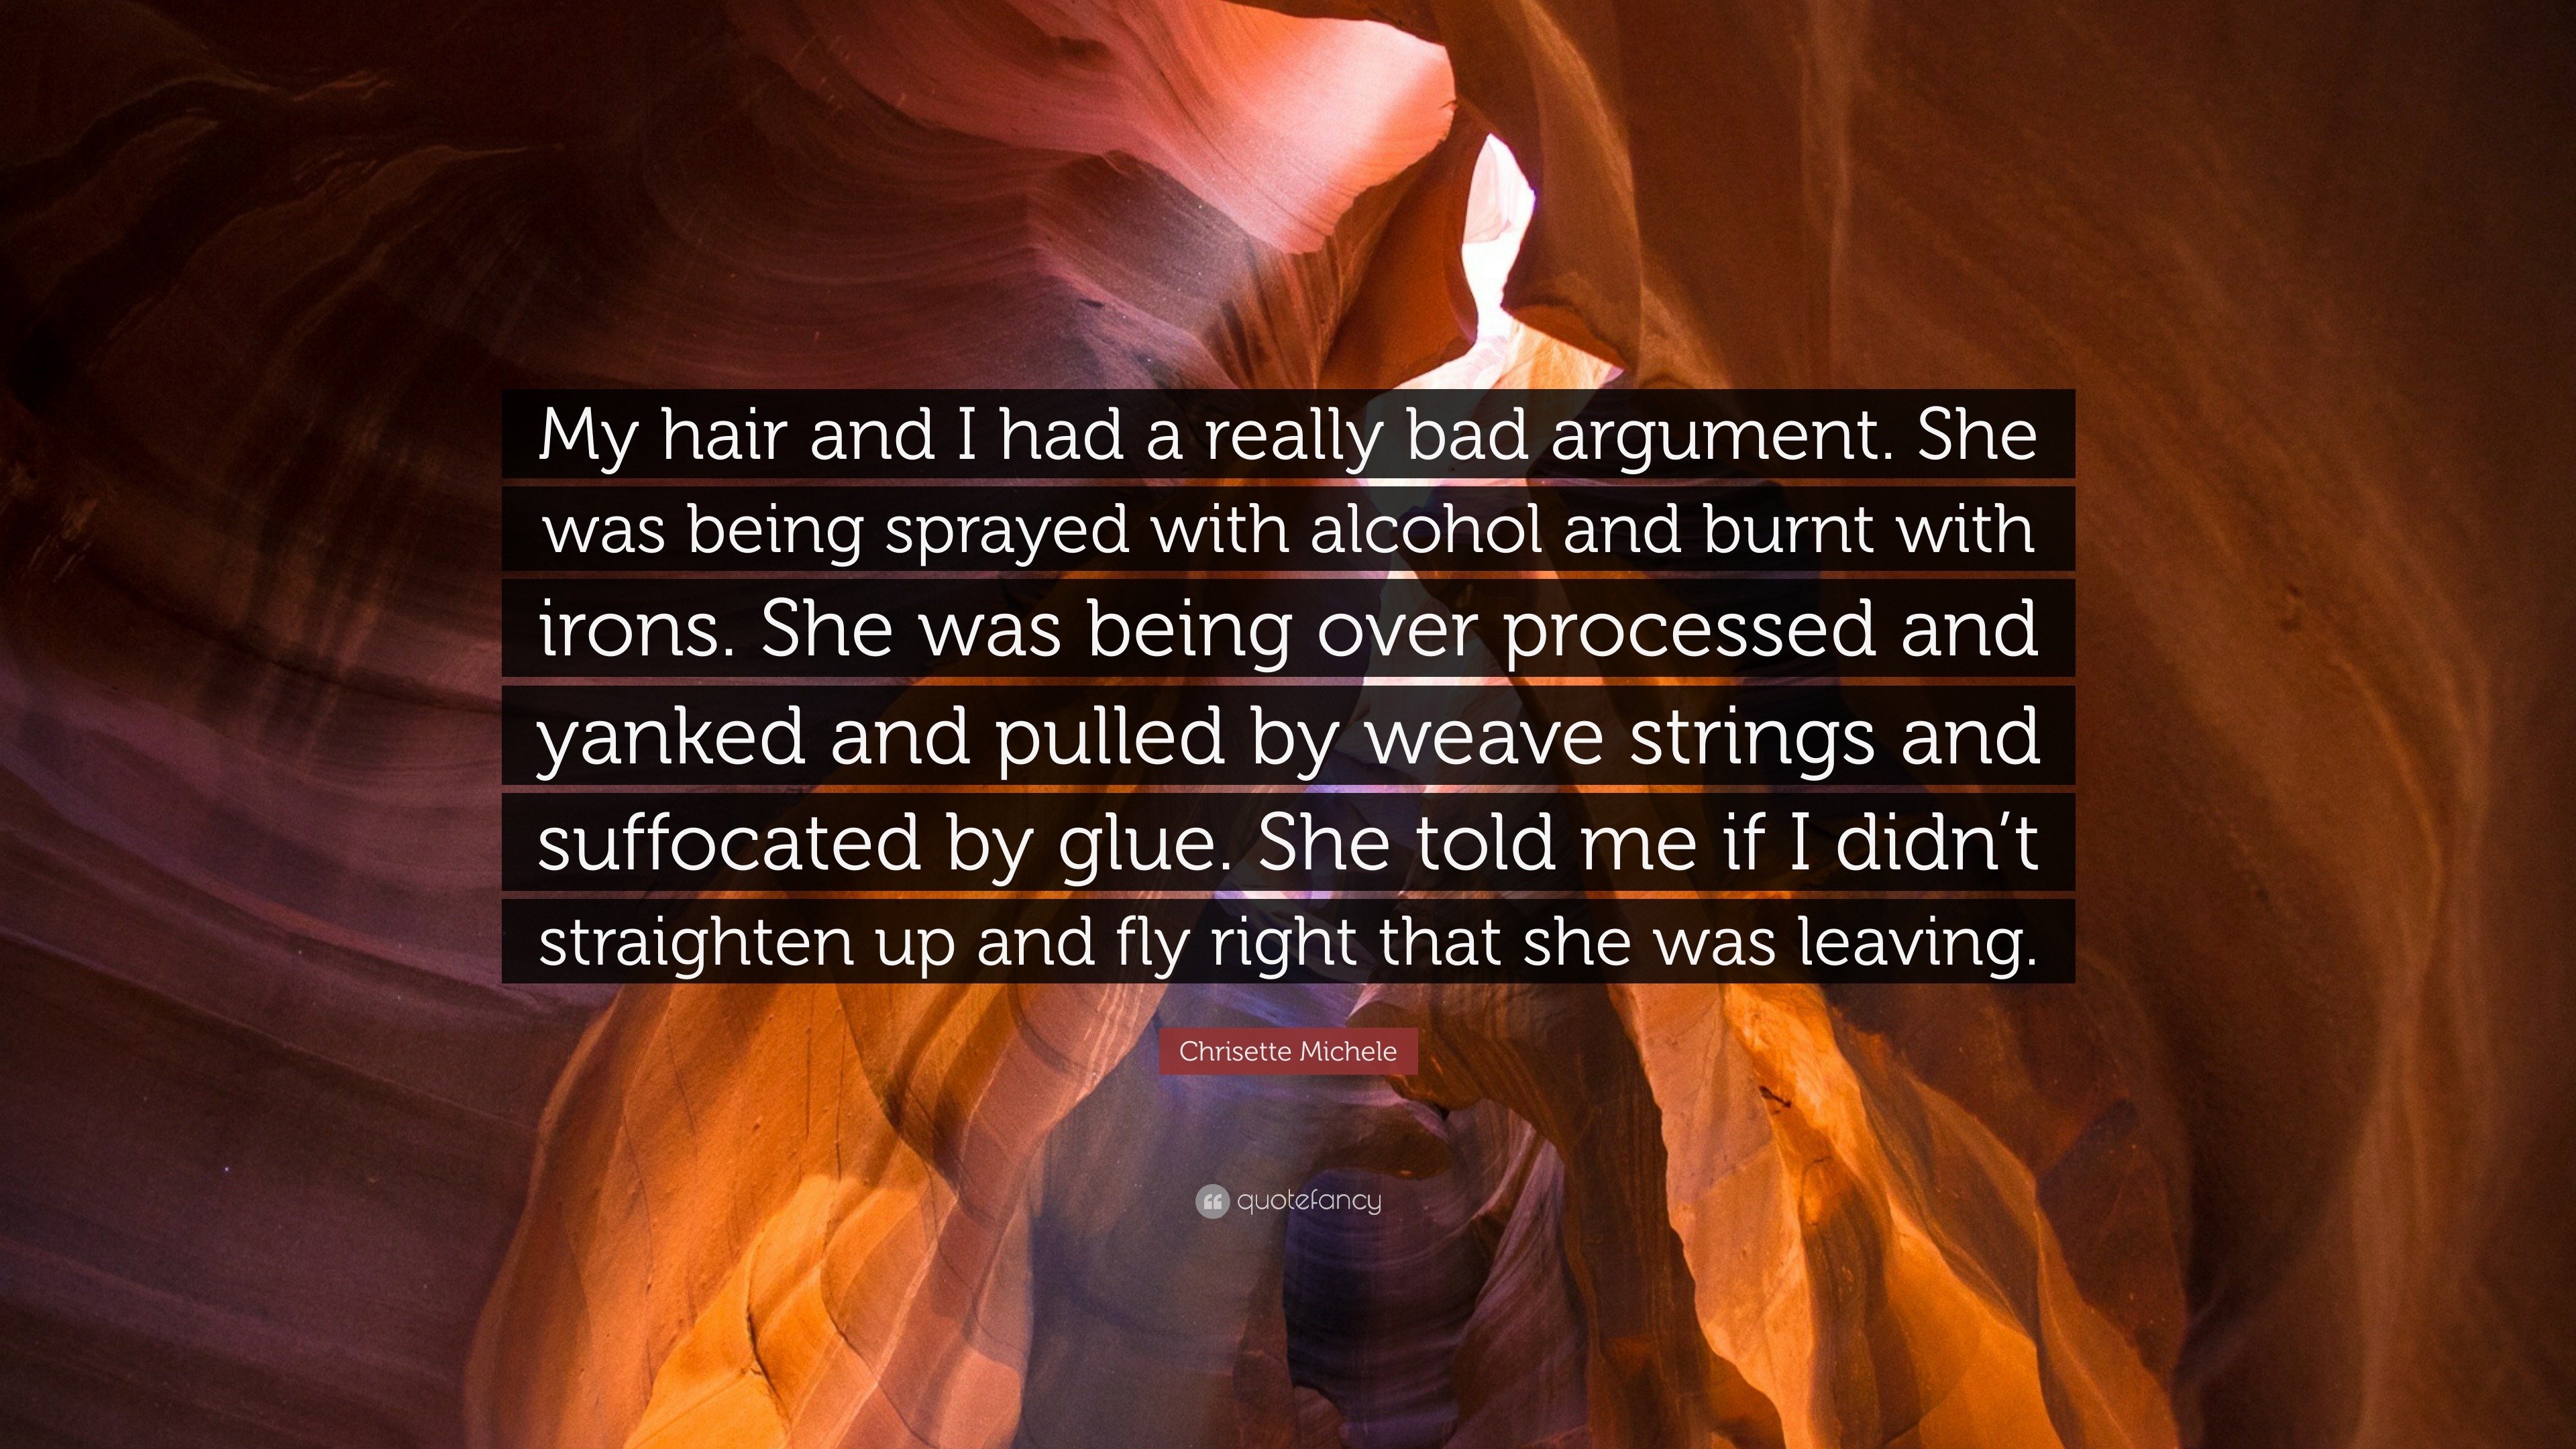 Chrisette Michele Quote: “My hair and I had a really bad argument. She was  being sprayed with alcohol and burnt with irons. She was being over pro...”